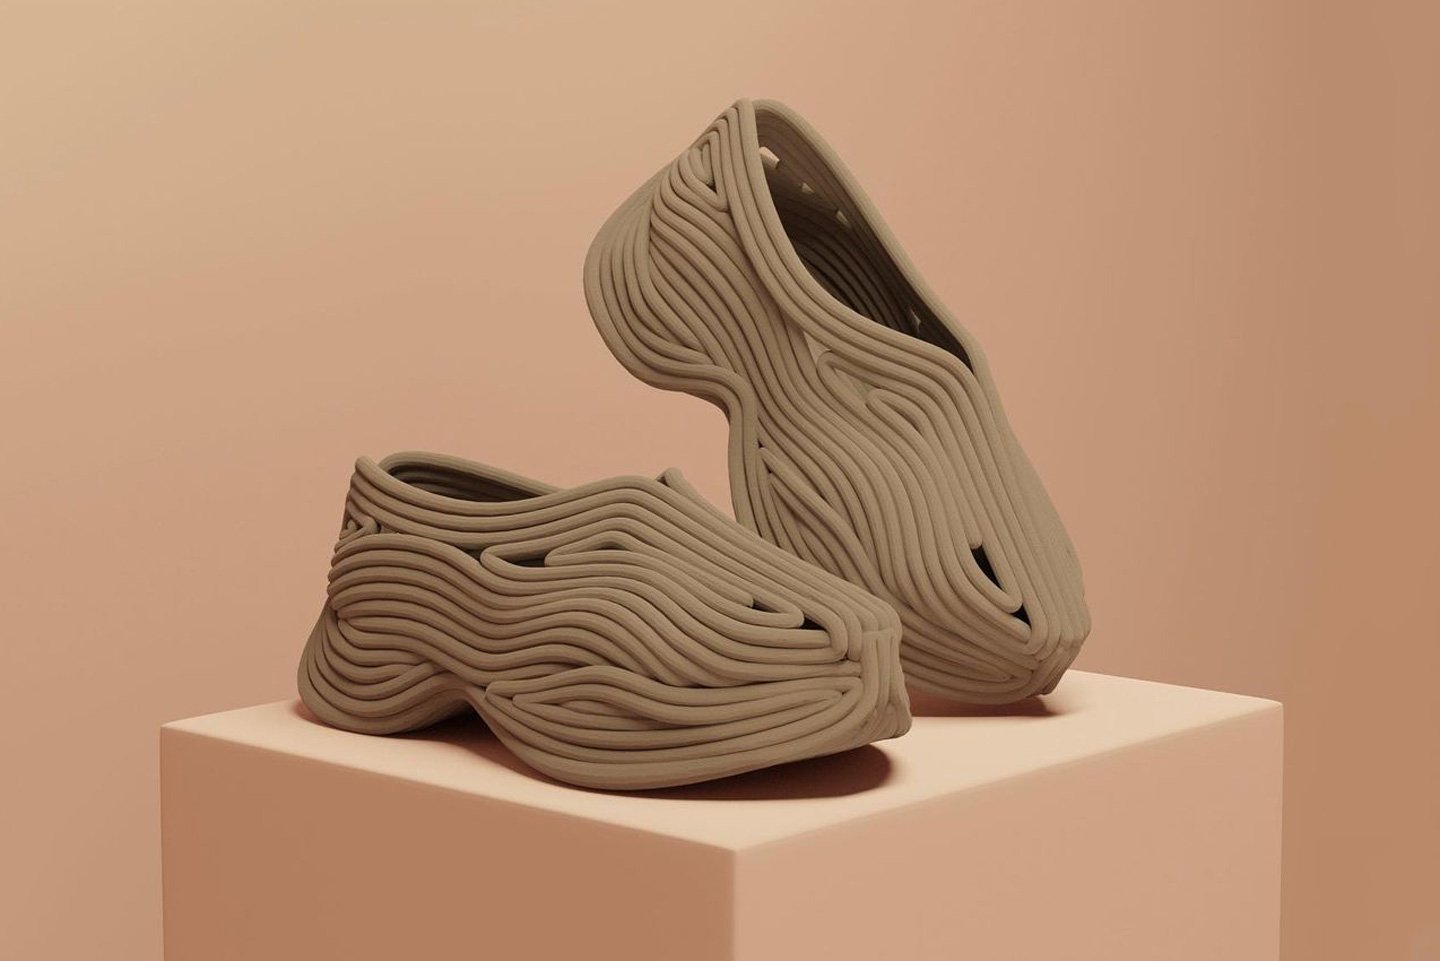 #The Yeezy Slides wish they were as cool as these single-material 3D-printed studio runners